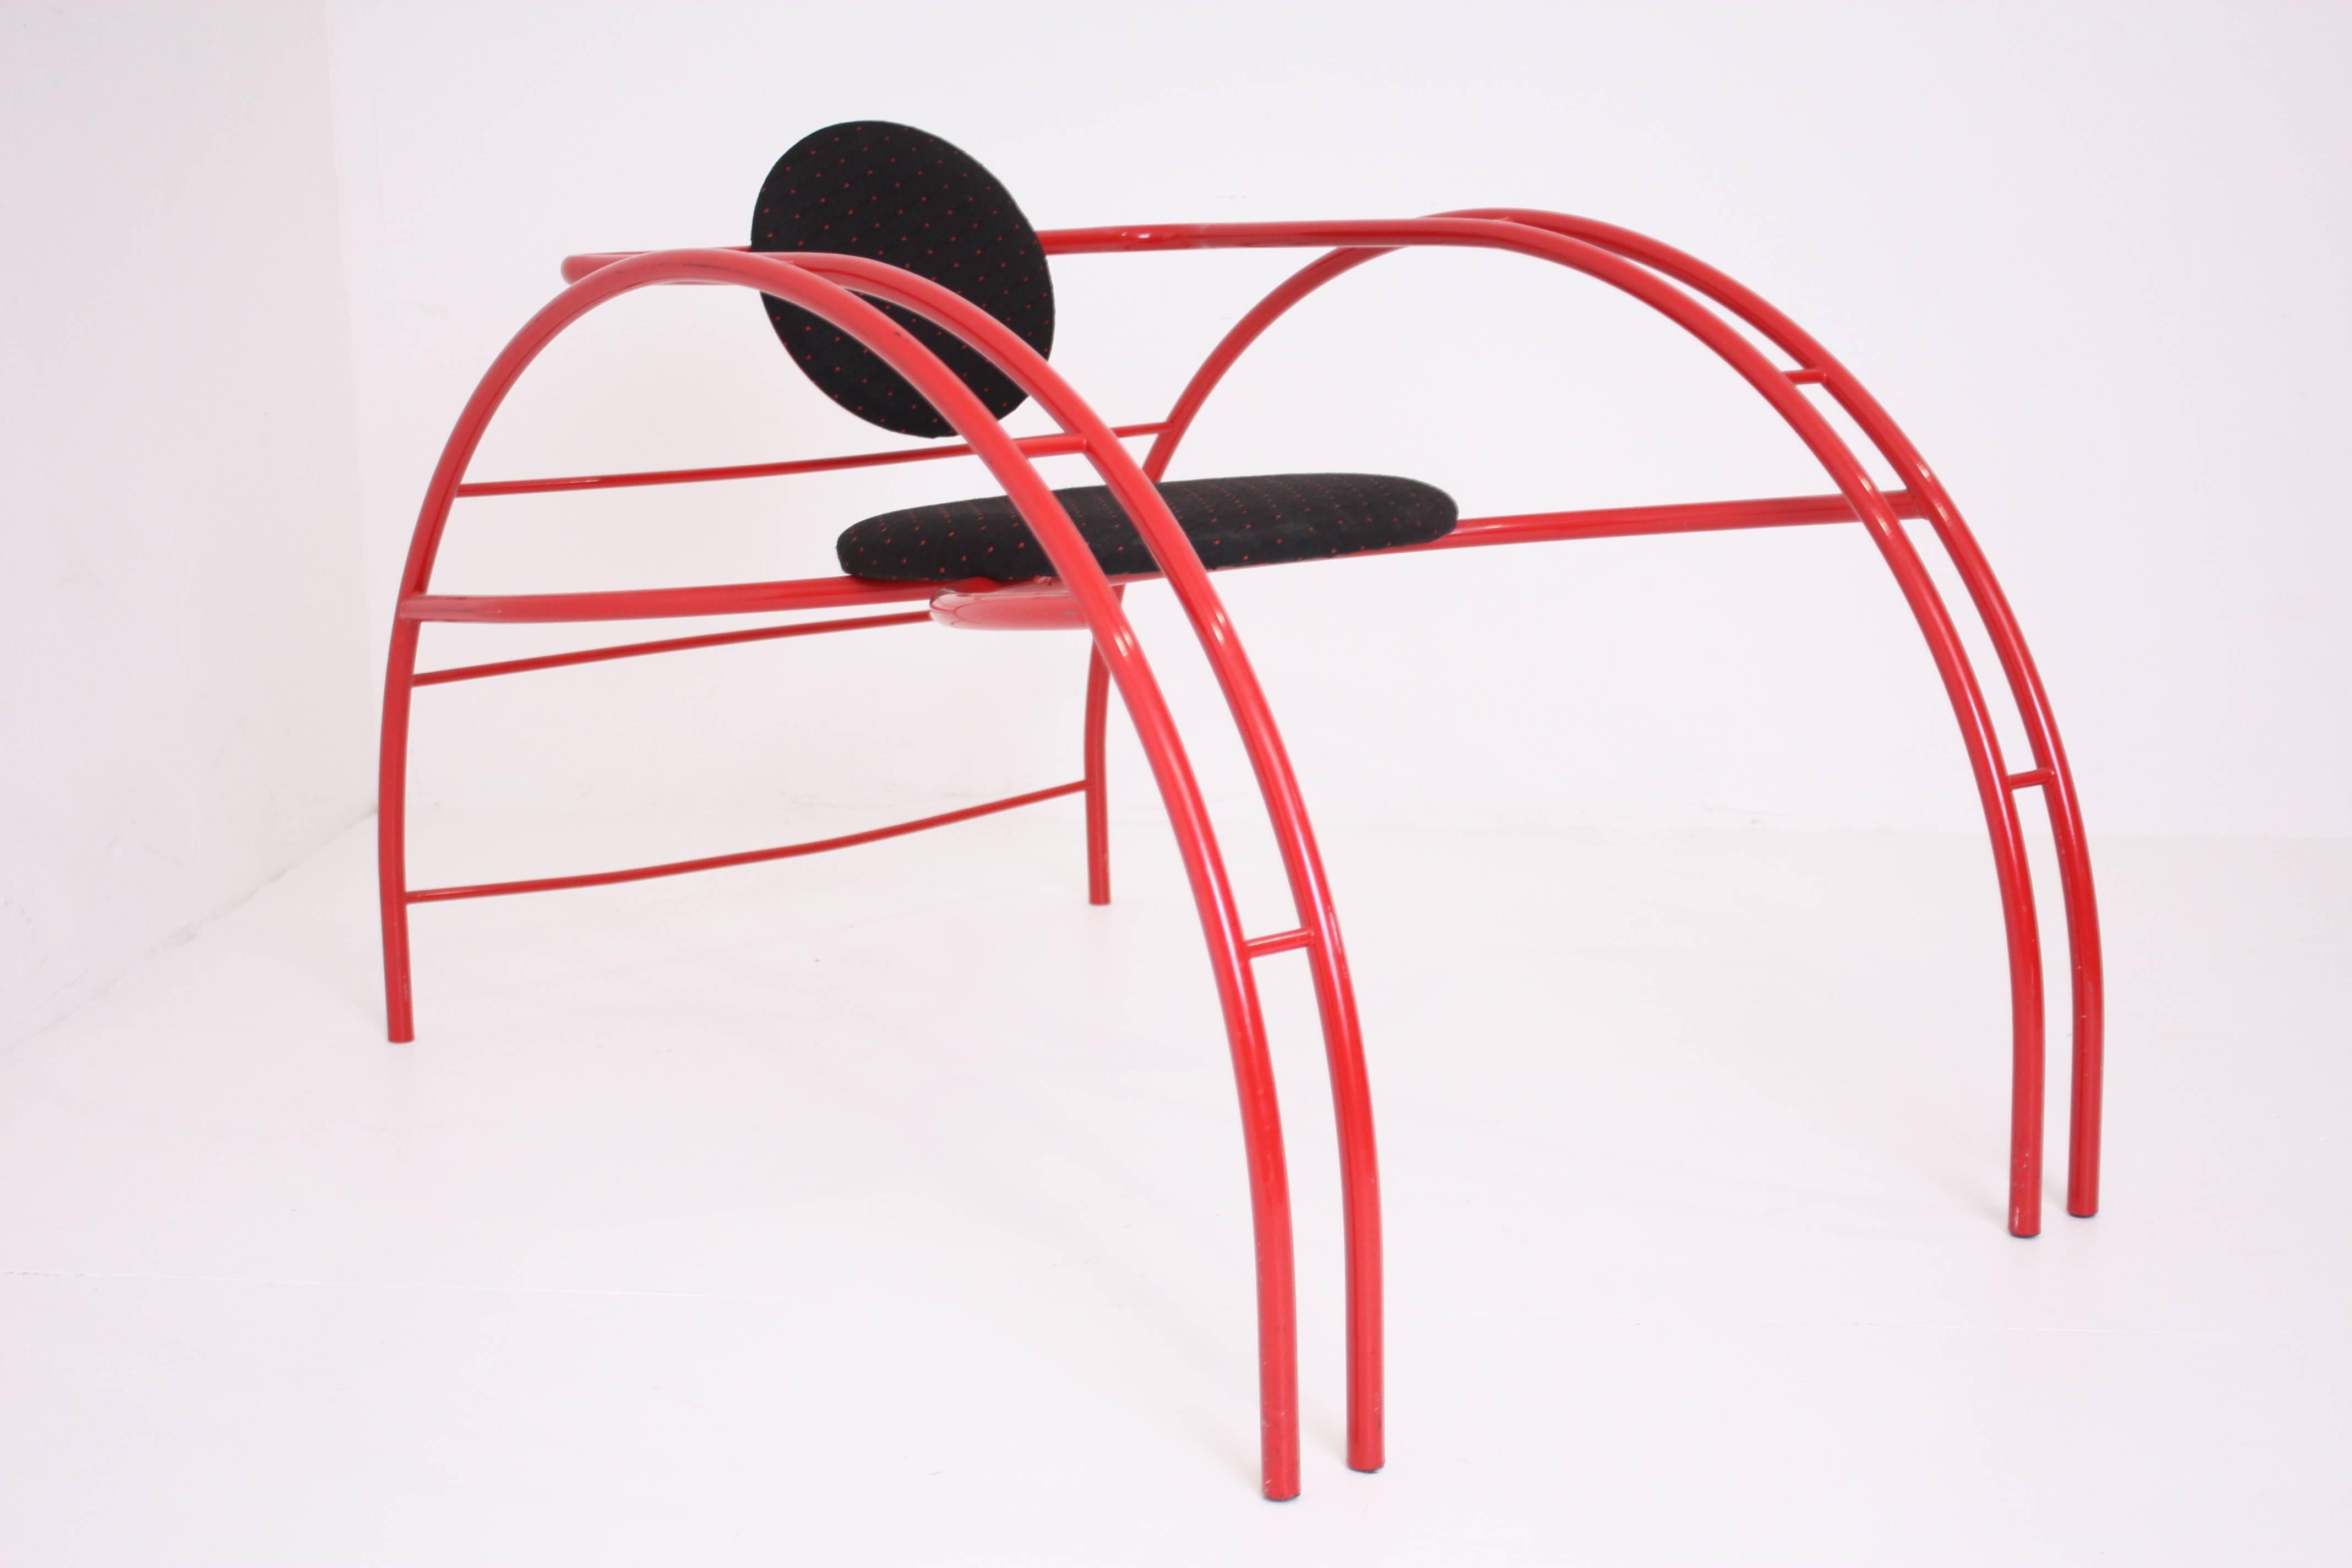 Quebec 69 Spider chair by Les Amisca. 